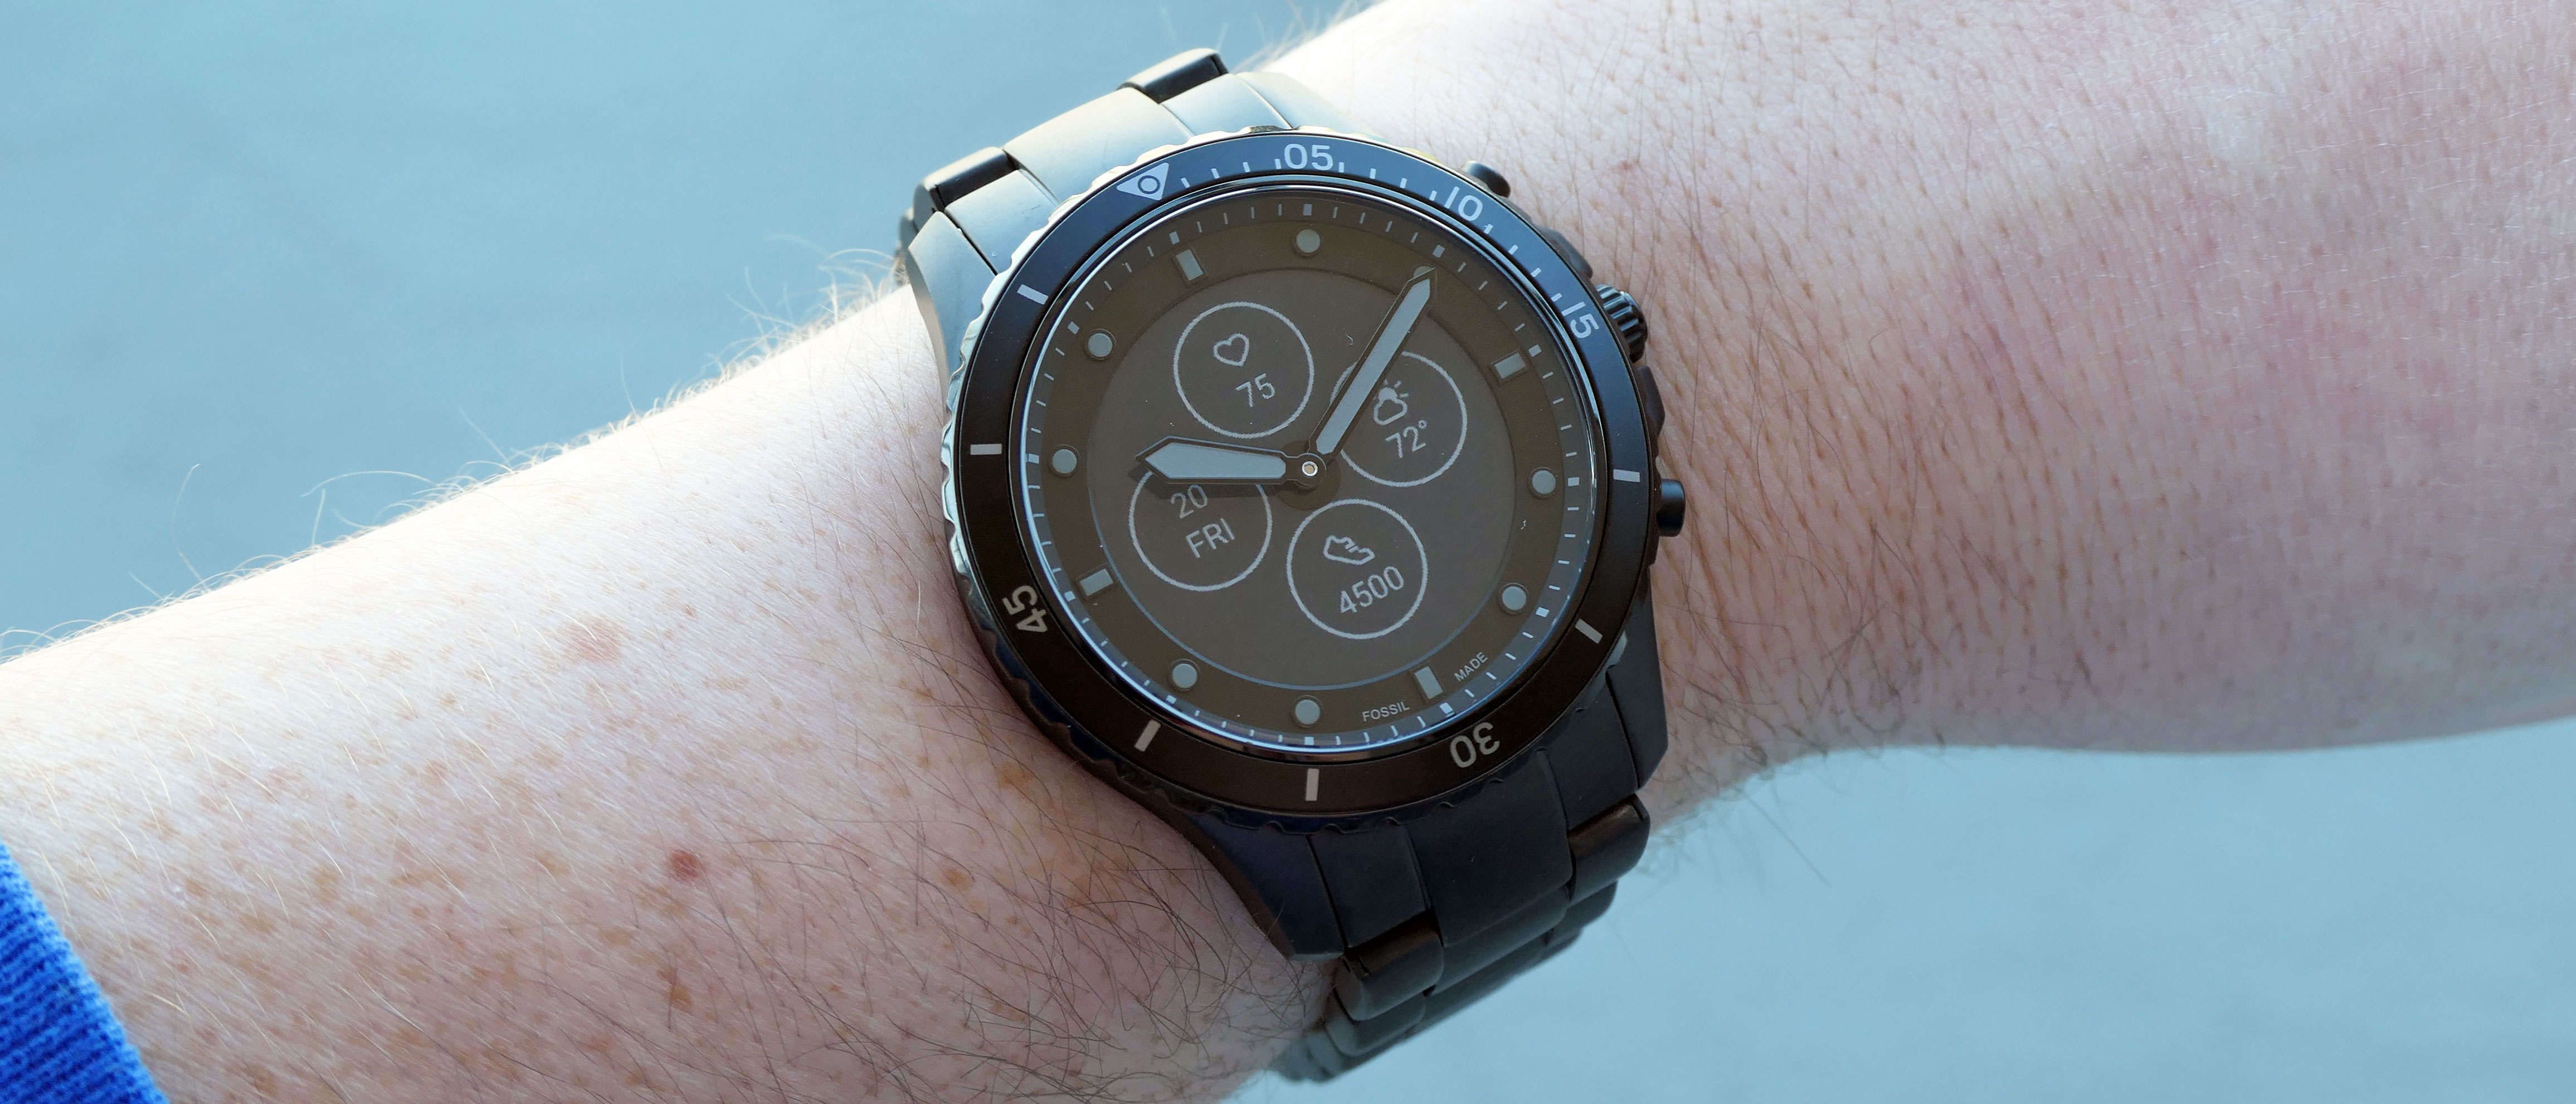 AJh,fossil nate hybrid review,hrdsindia.org